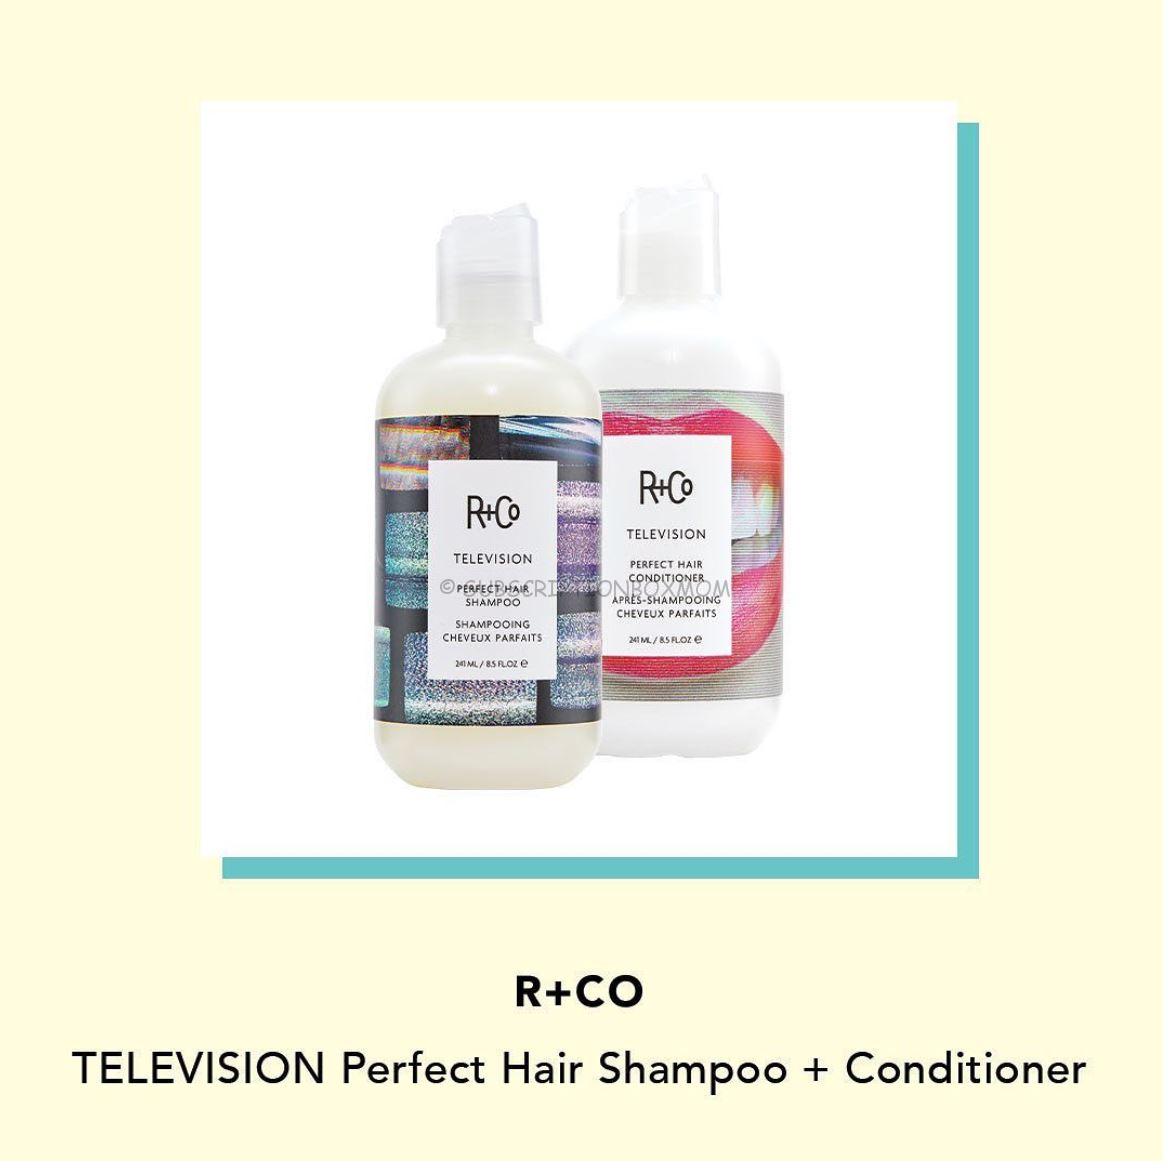 R+CO Television Perfect Hair Shampoo + Conditioner